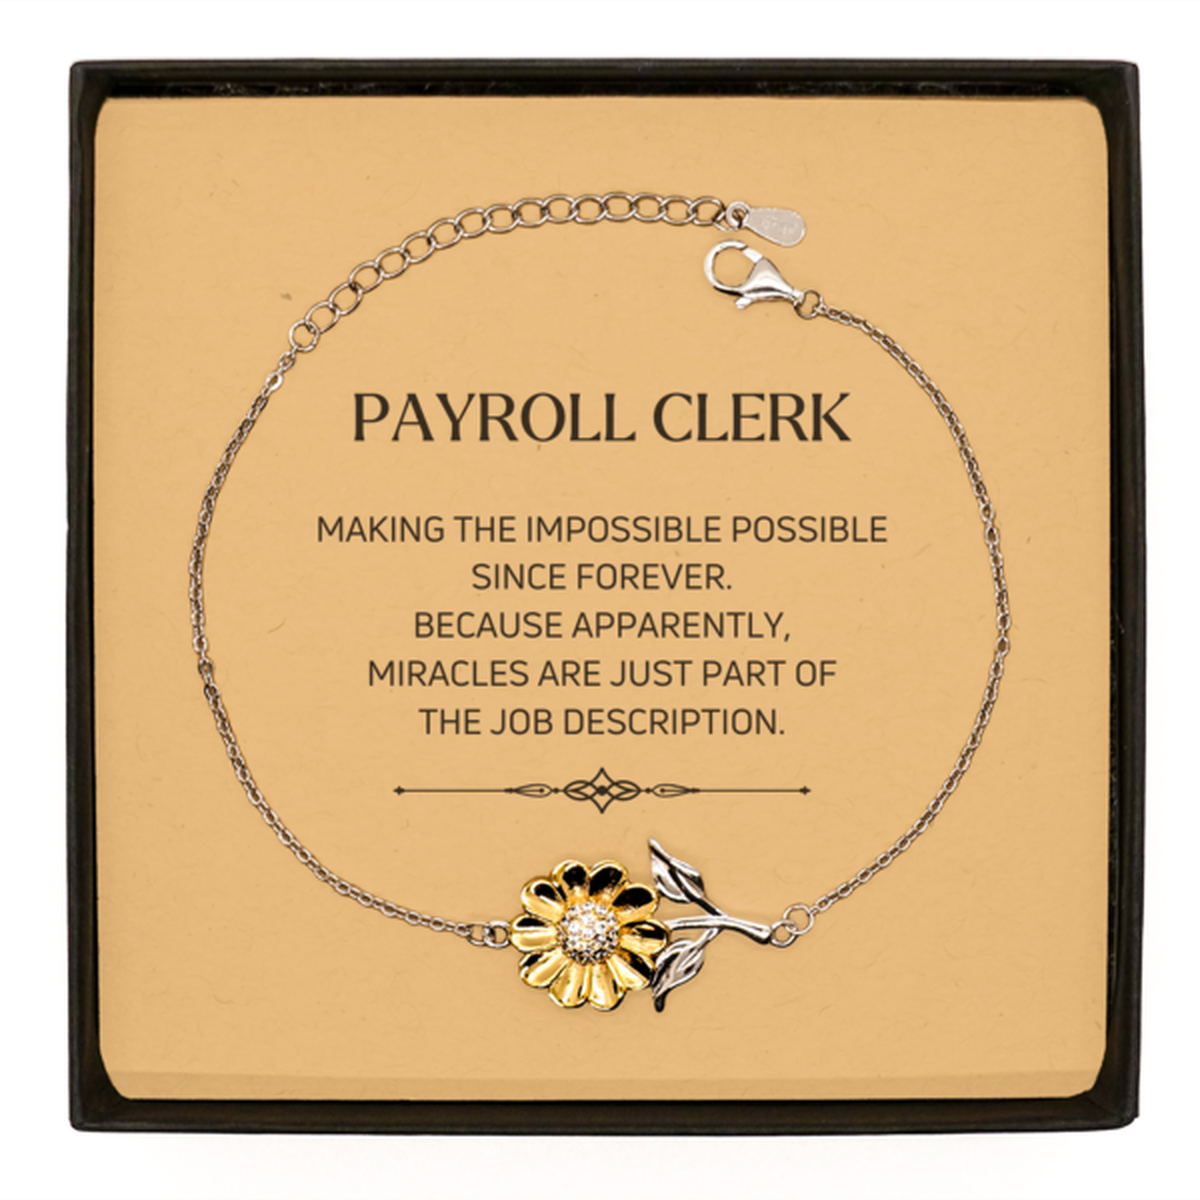 Funny Payroll Clerk Gifts, Miracles are just part of the job description, Inspirational Birthday Sunflower Bracelet For Payroll Clerk, Men, Women, Coworkers, Friends, Boss